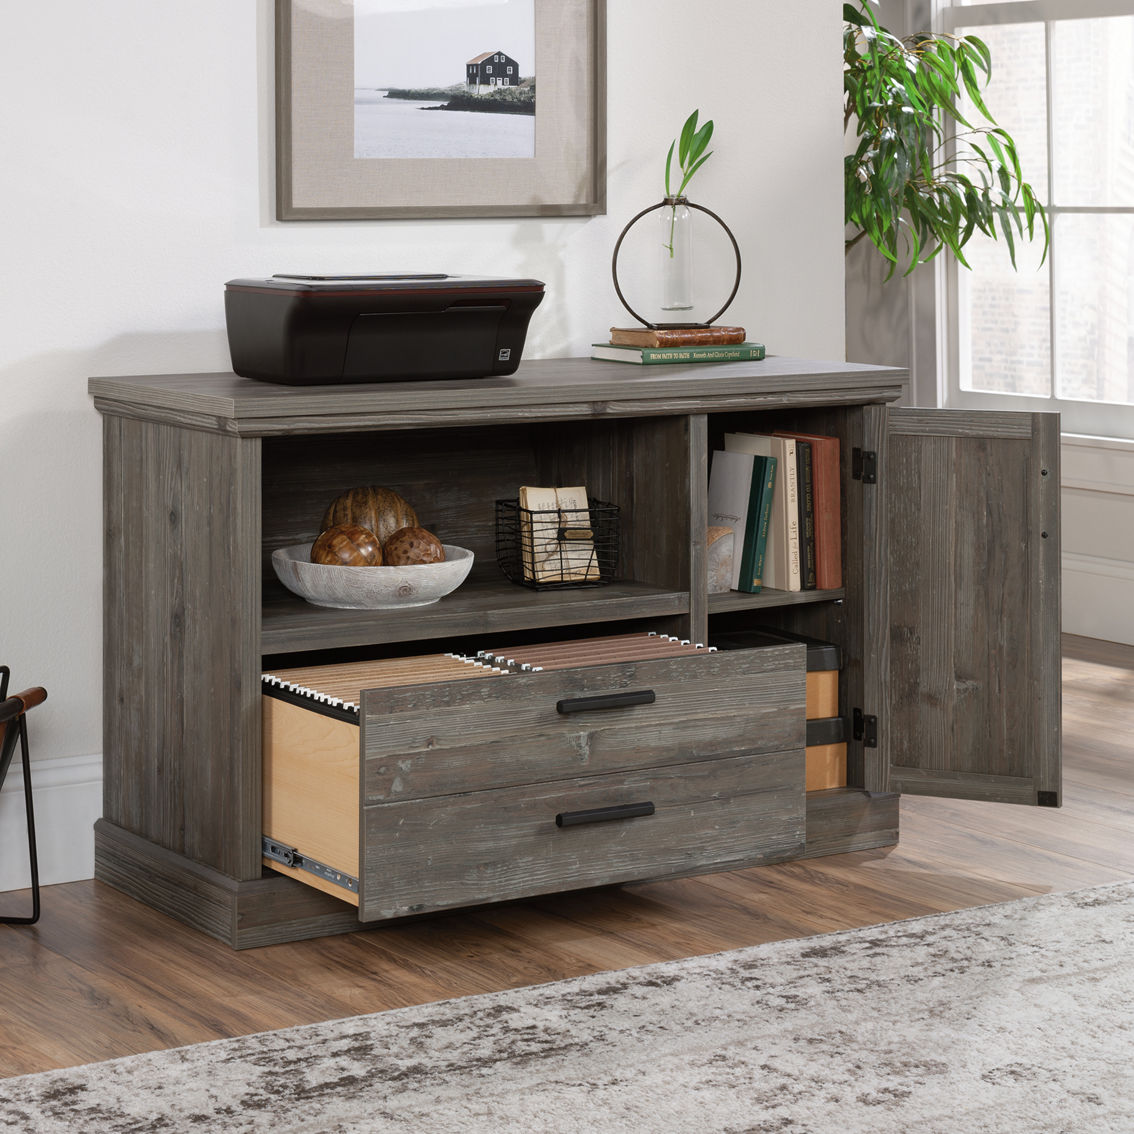 Sauder Office Storage File Credenza in Pebble Pine - Image 2 of 3